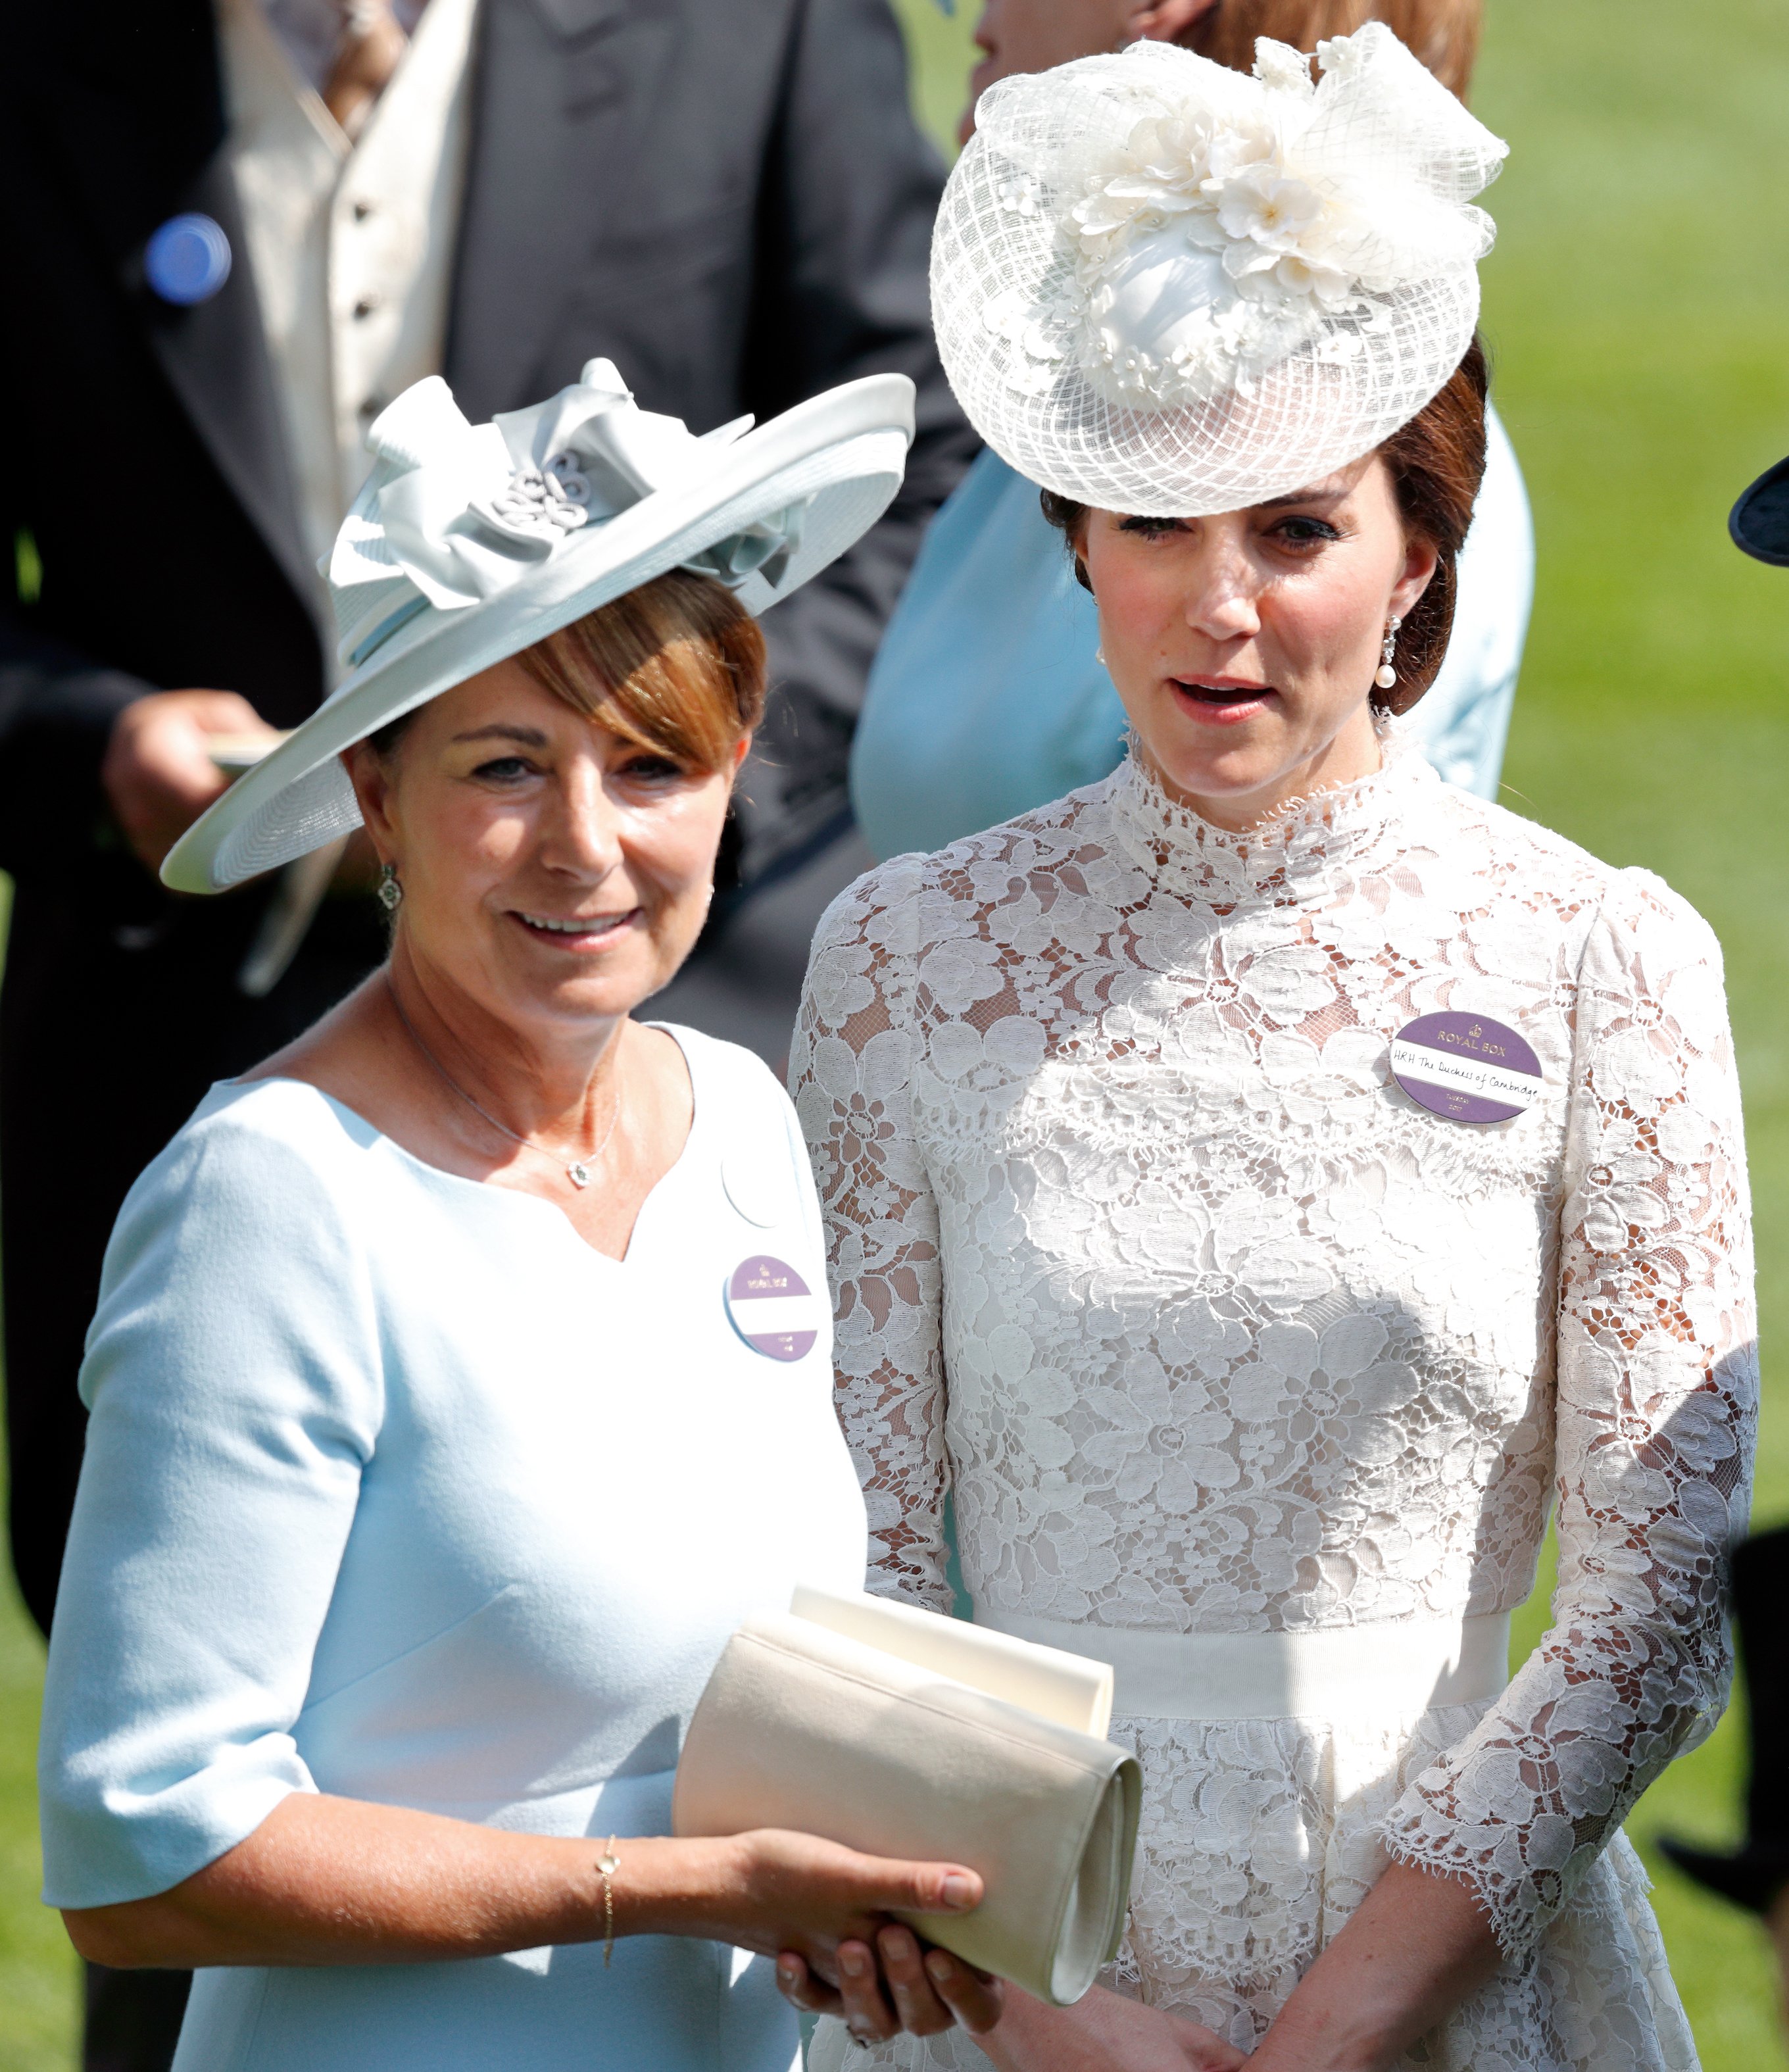 Carole Middleton and Catherine, Duchess of Cambridge attend day 1 of Royal Ascot at Ascot Racecourse on June 20, 2017 in Ascot, England. | Source: Getty Images